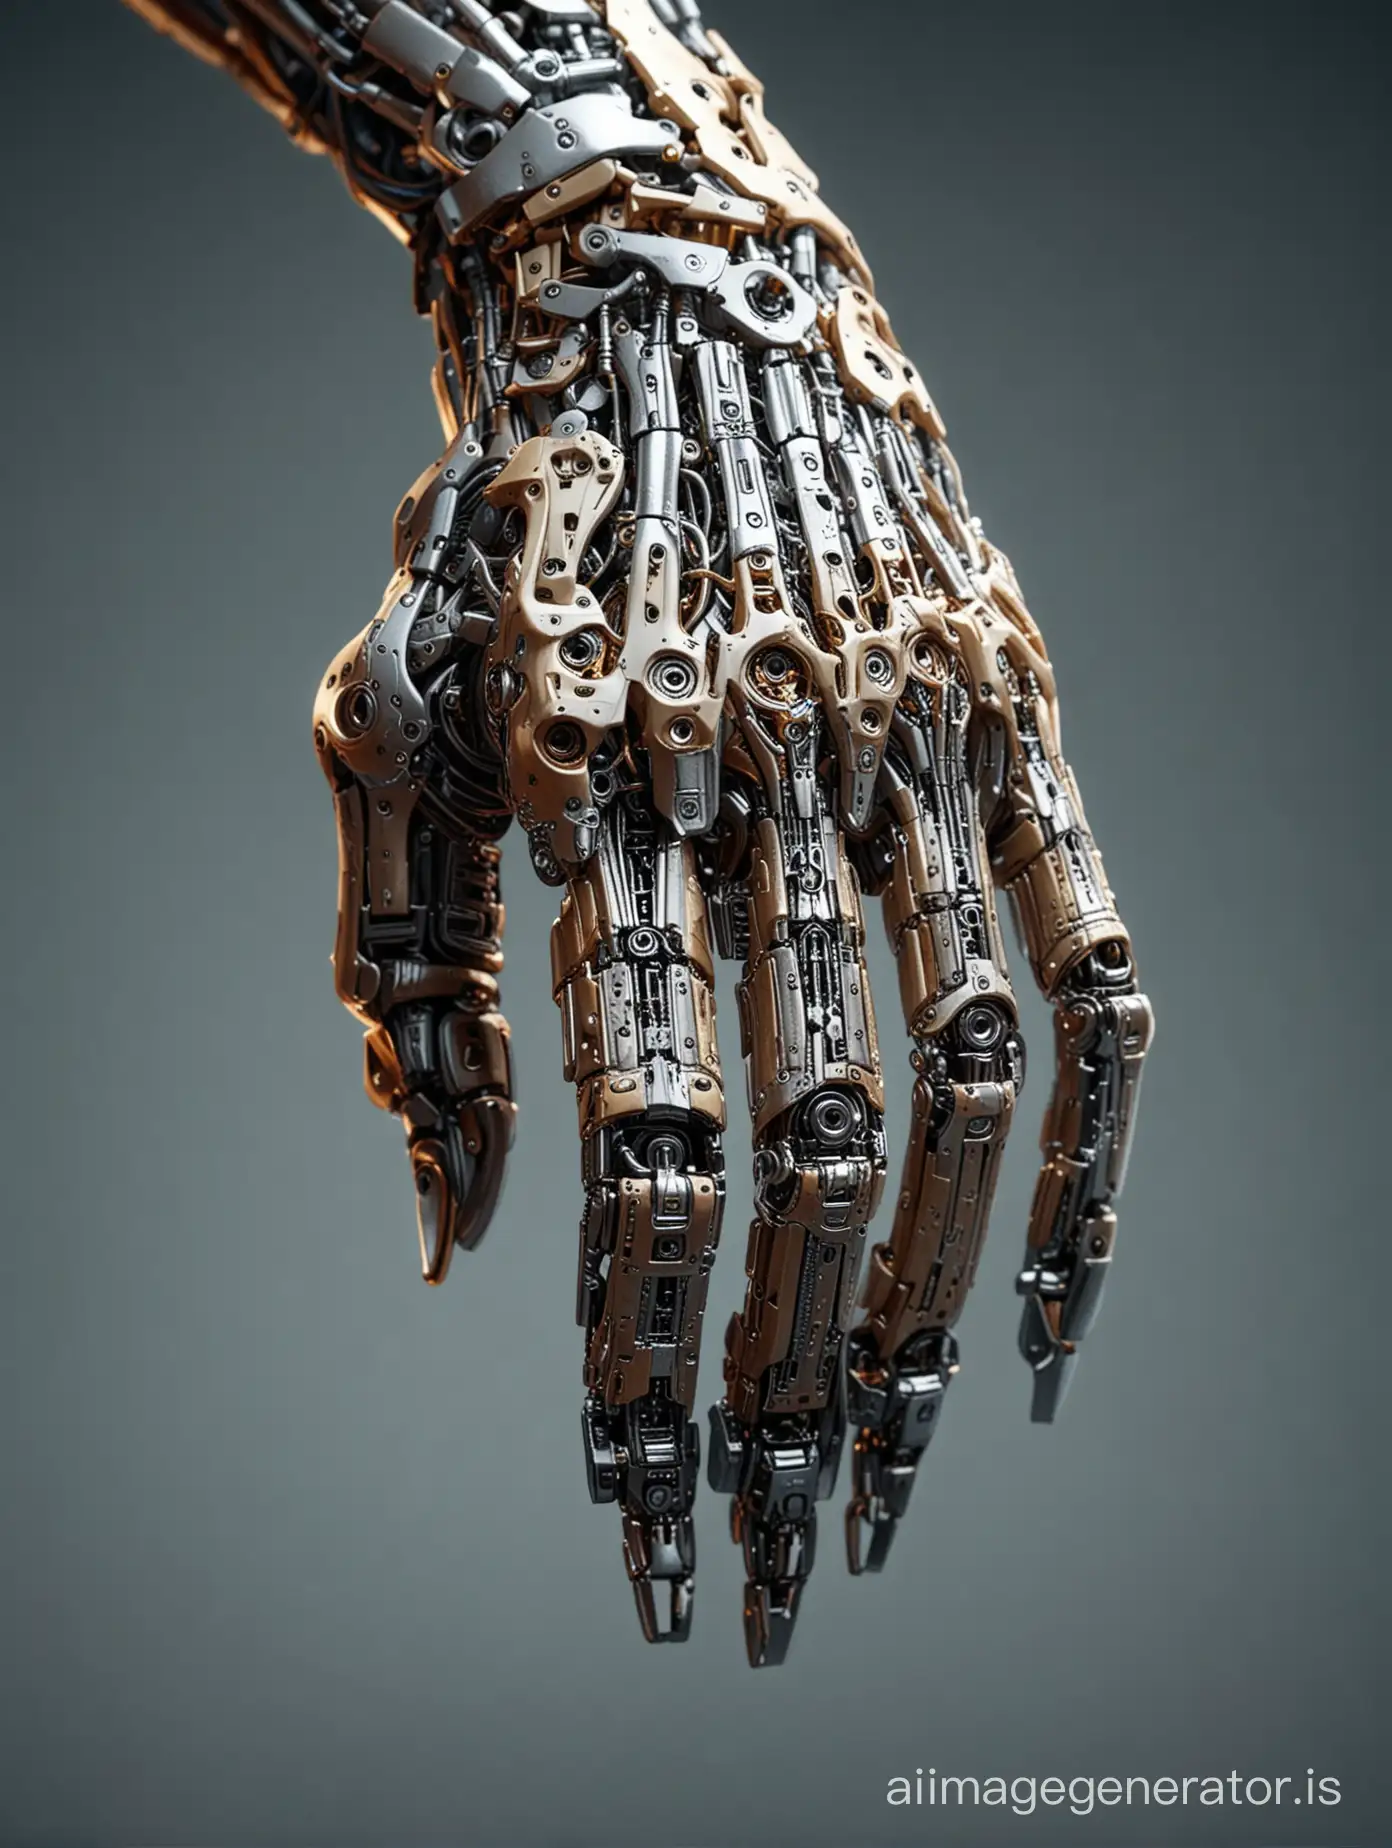 Close-up of a human hand transforming into a robotic hand, with intricate details showing the transition from skin to metal. The focus is on the fingertips where the transformation is most pronounced, against a stark, high-contrast background that emphasizes the complexity of the cybernetic enhancements. Soft, ambient light illuminates the scene, revealing the fine craftsmanship of the mechanical parts -stylize 200